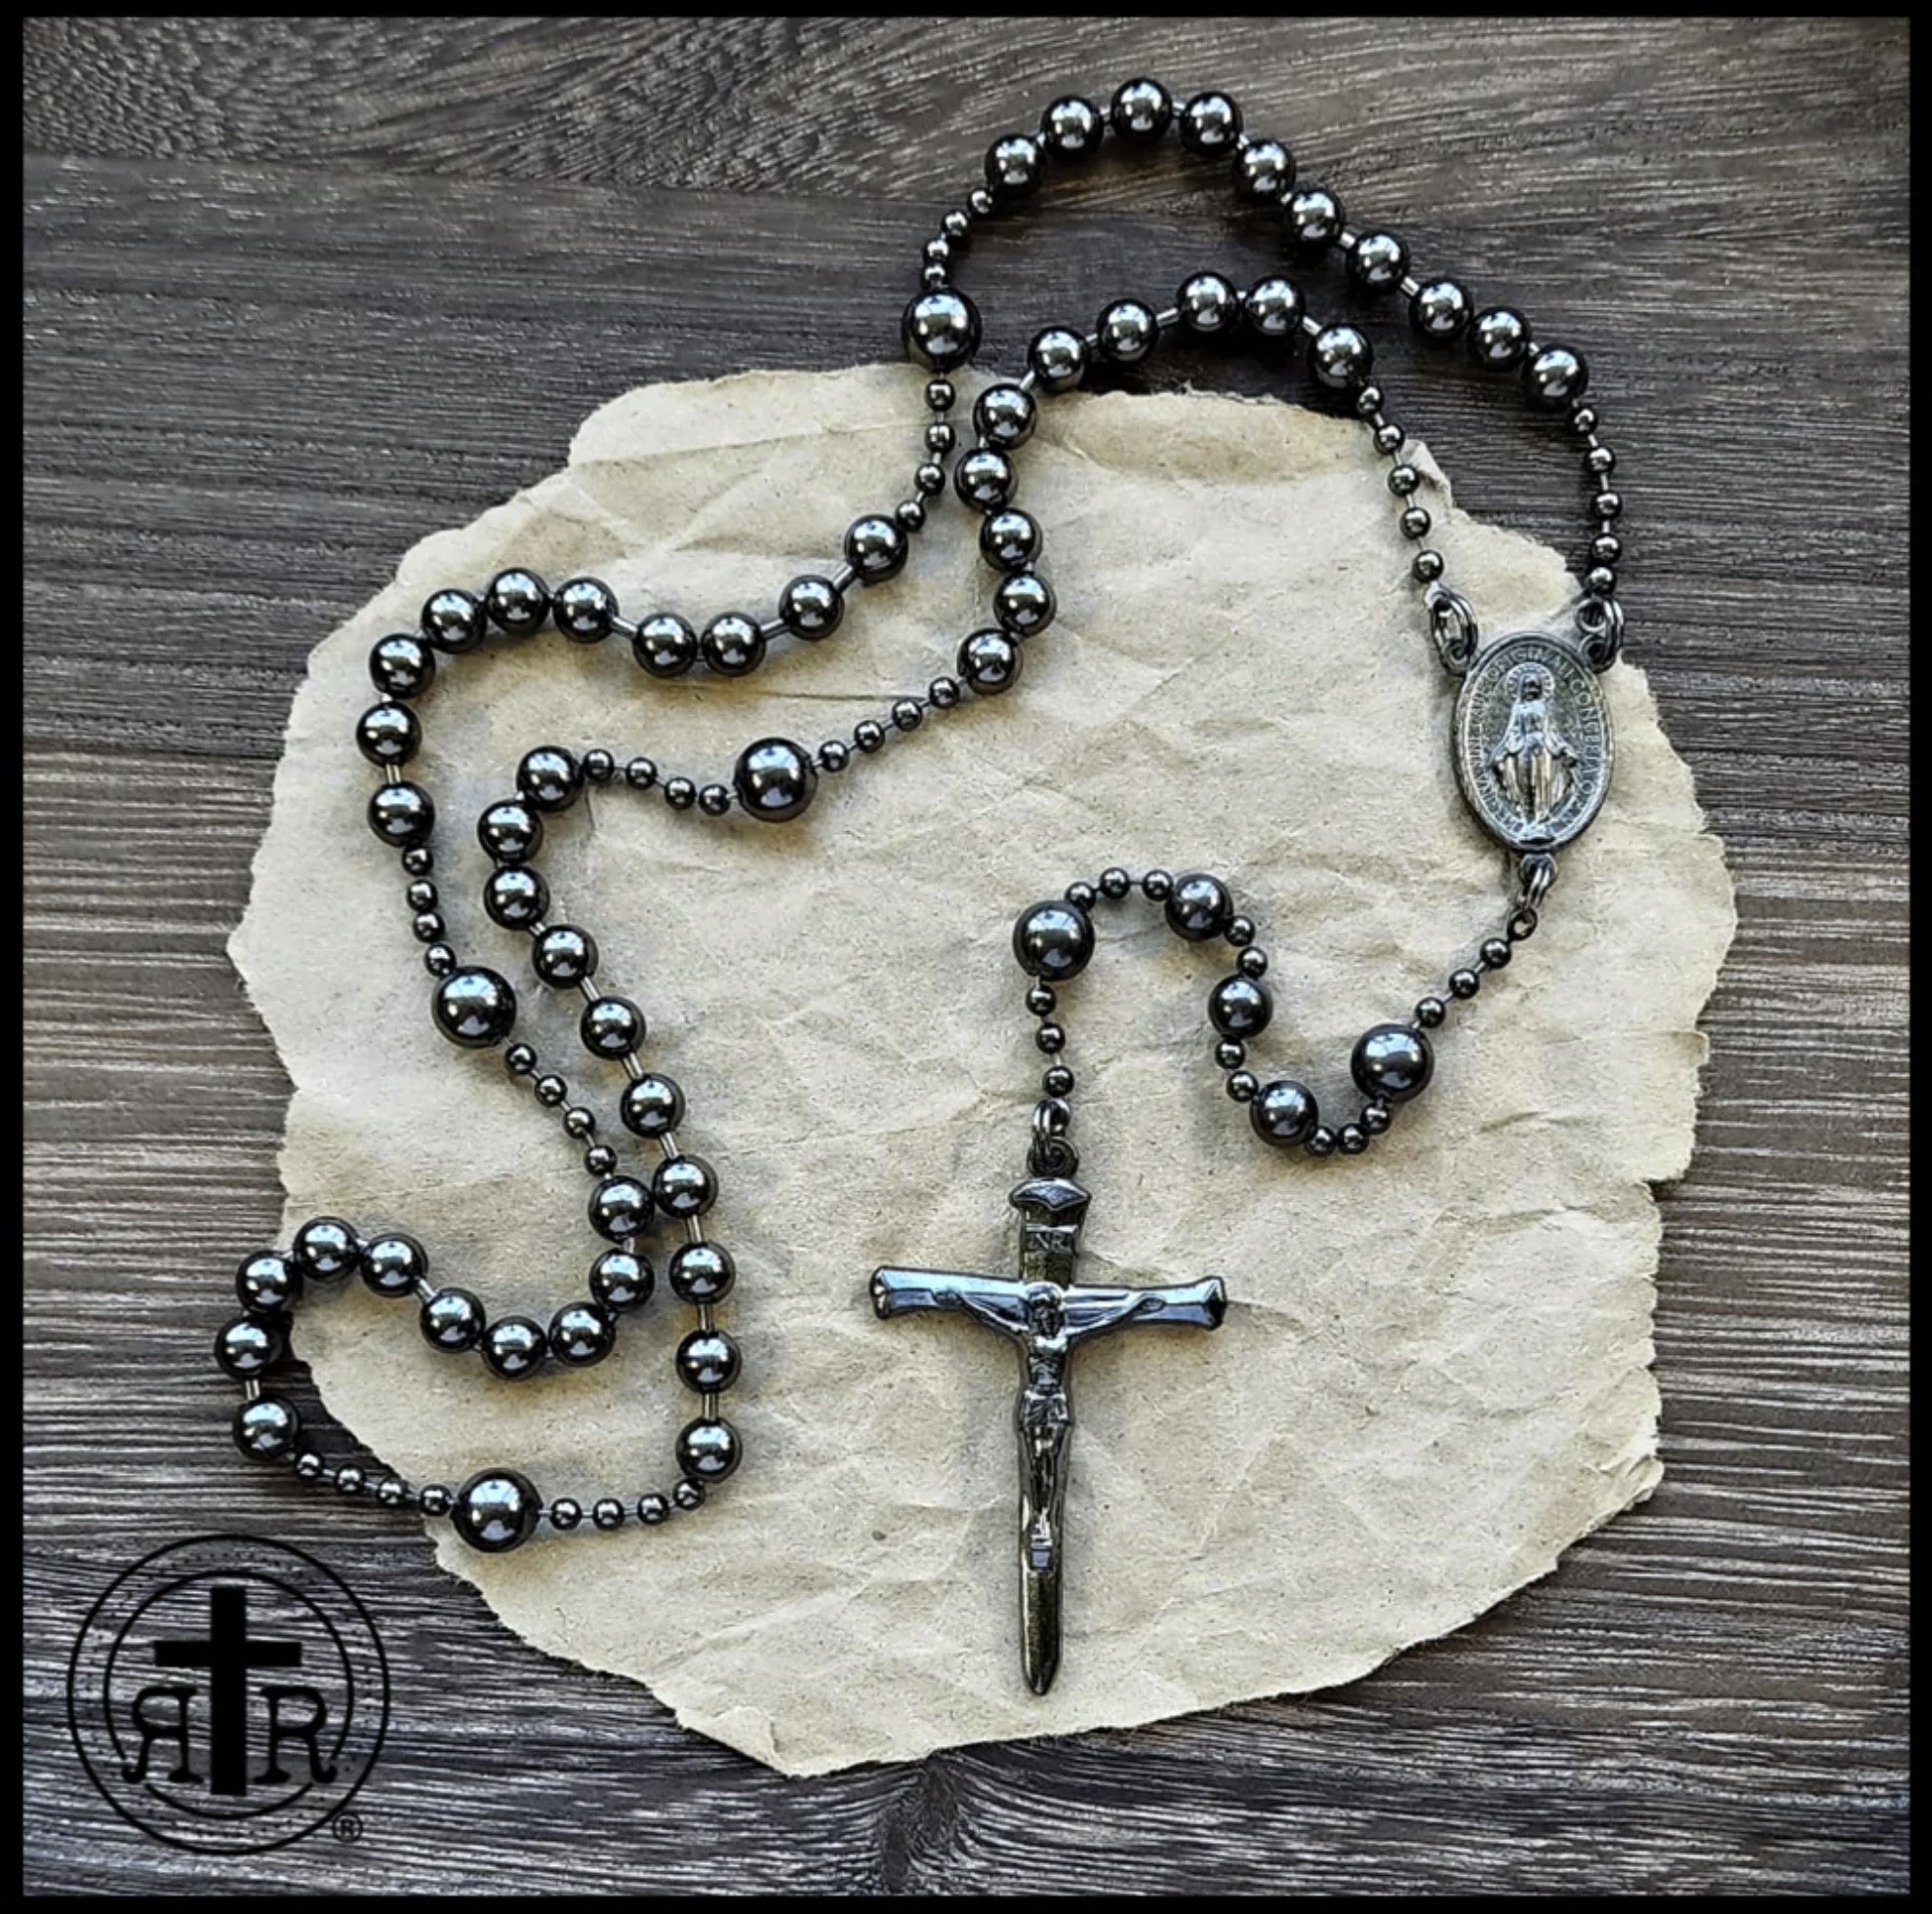 Why get a WWI Battle Beads Combat Rosary?